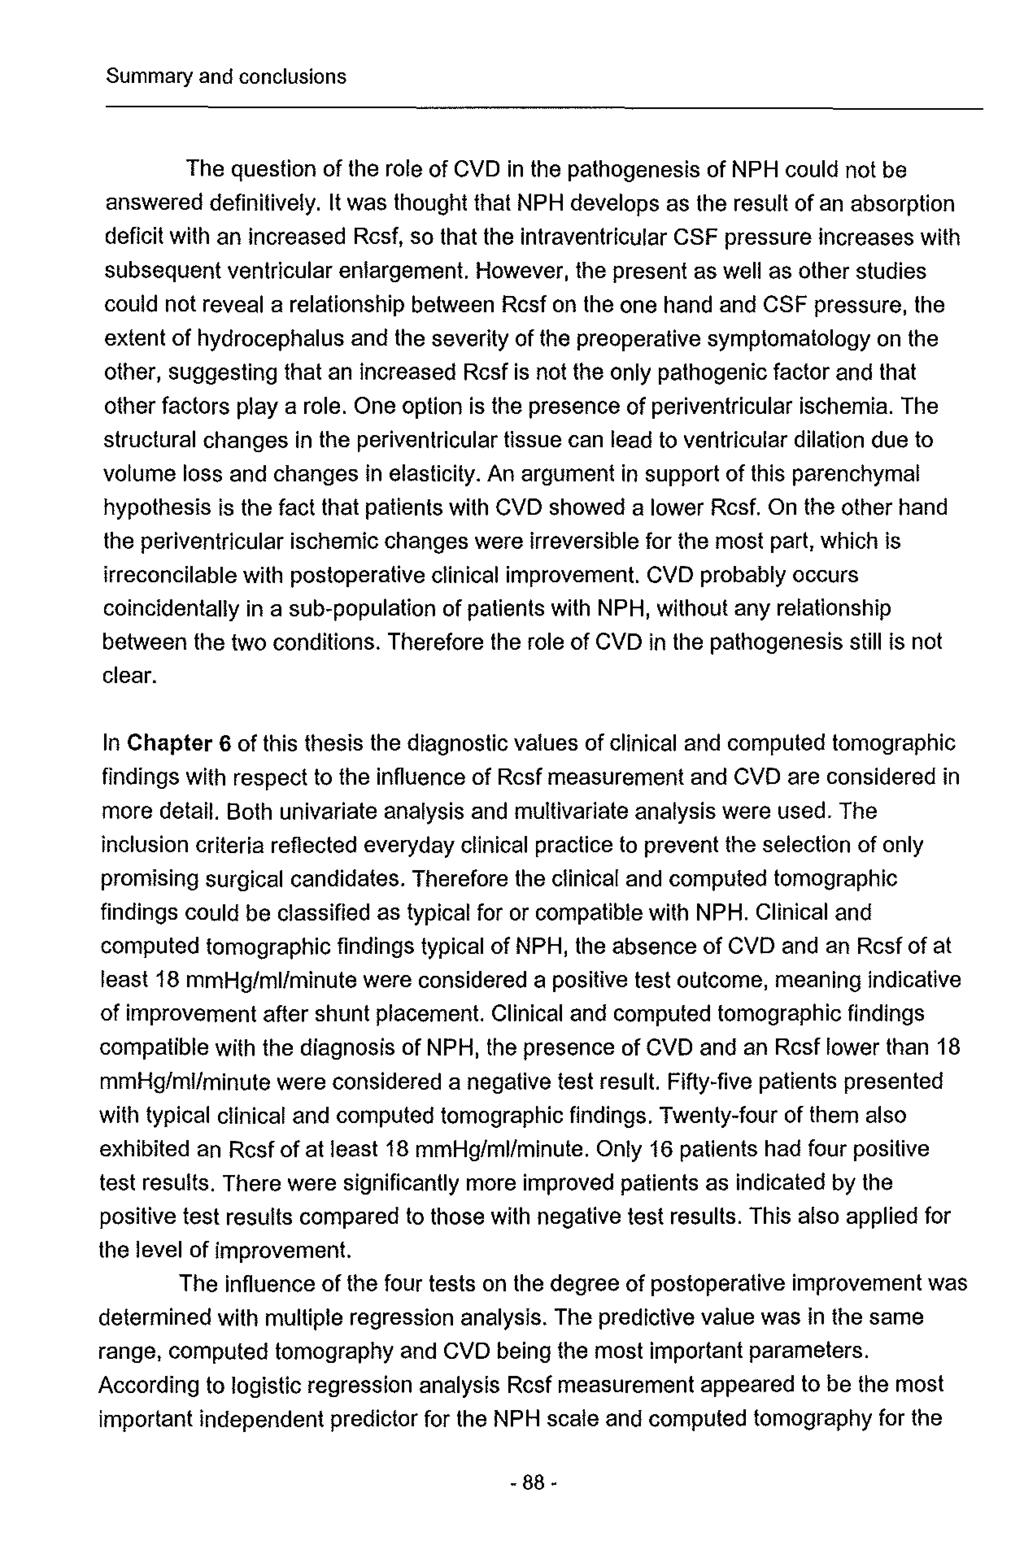 Summary and conclusions The question of the role of CVD in the pathogenesis of NPH could not be answered definitively.